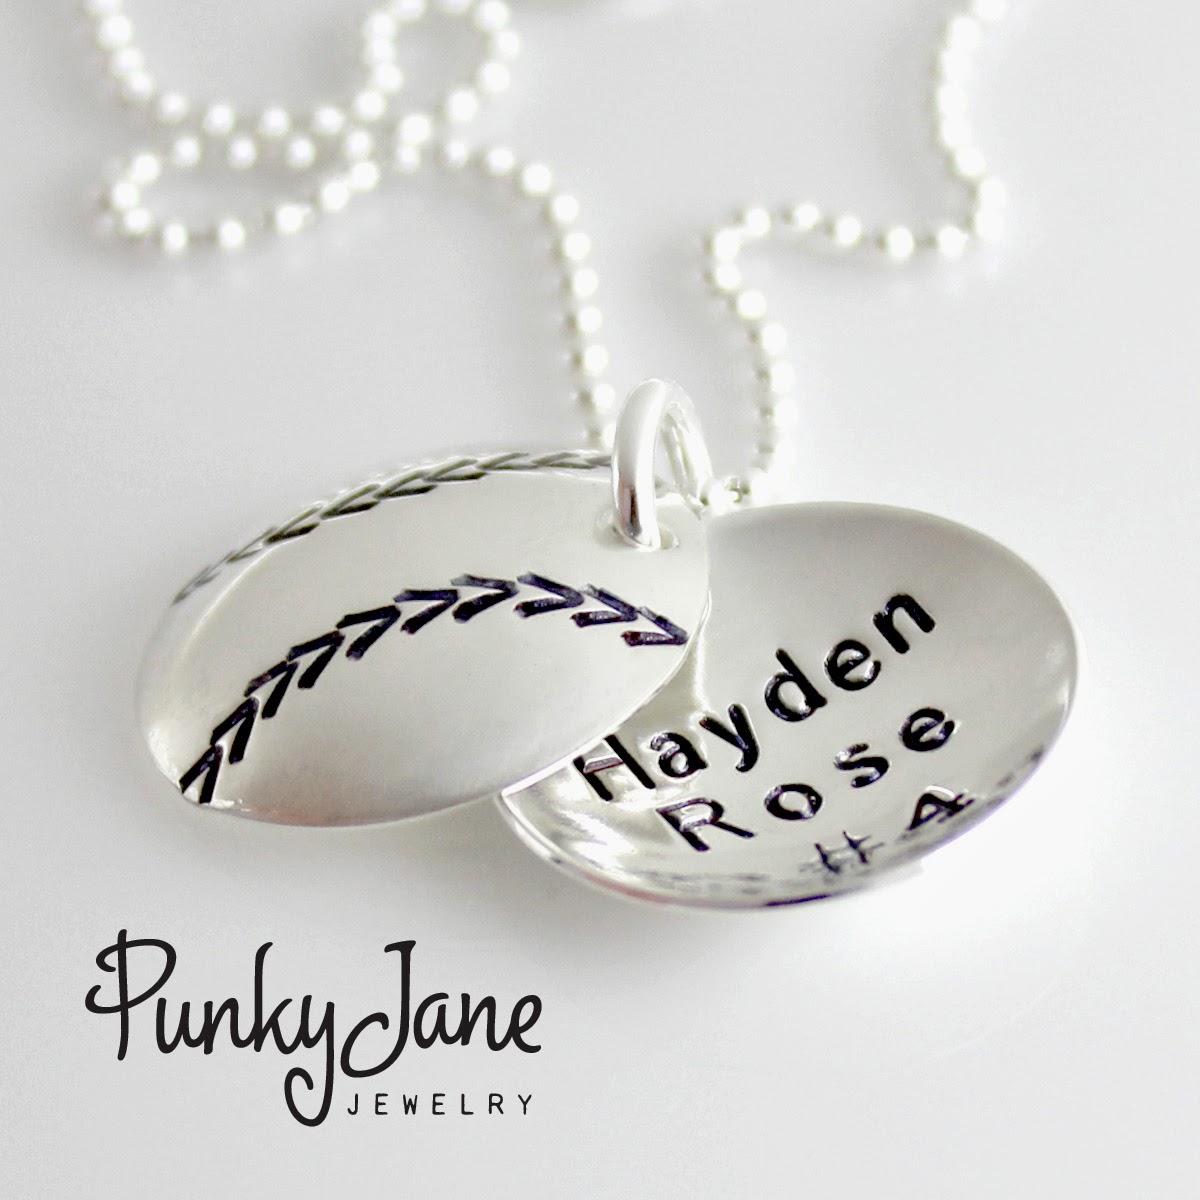 http://shop.punkyjane.com/My-Baseball-Player-hand-stamped-and-personalized-faux-locket-4521.htm